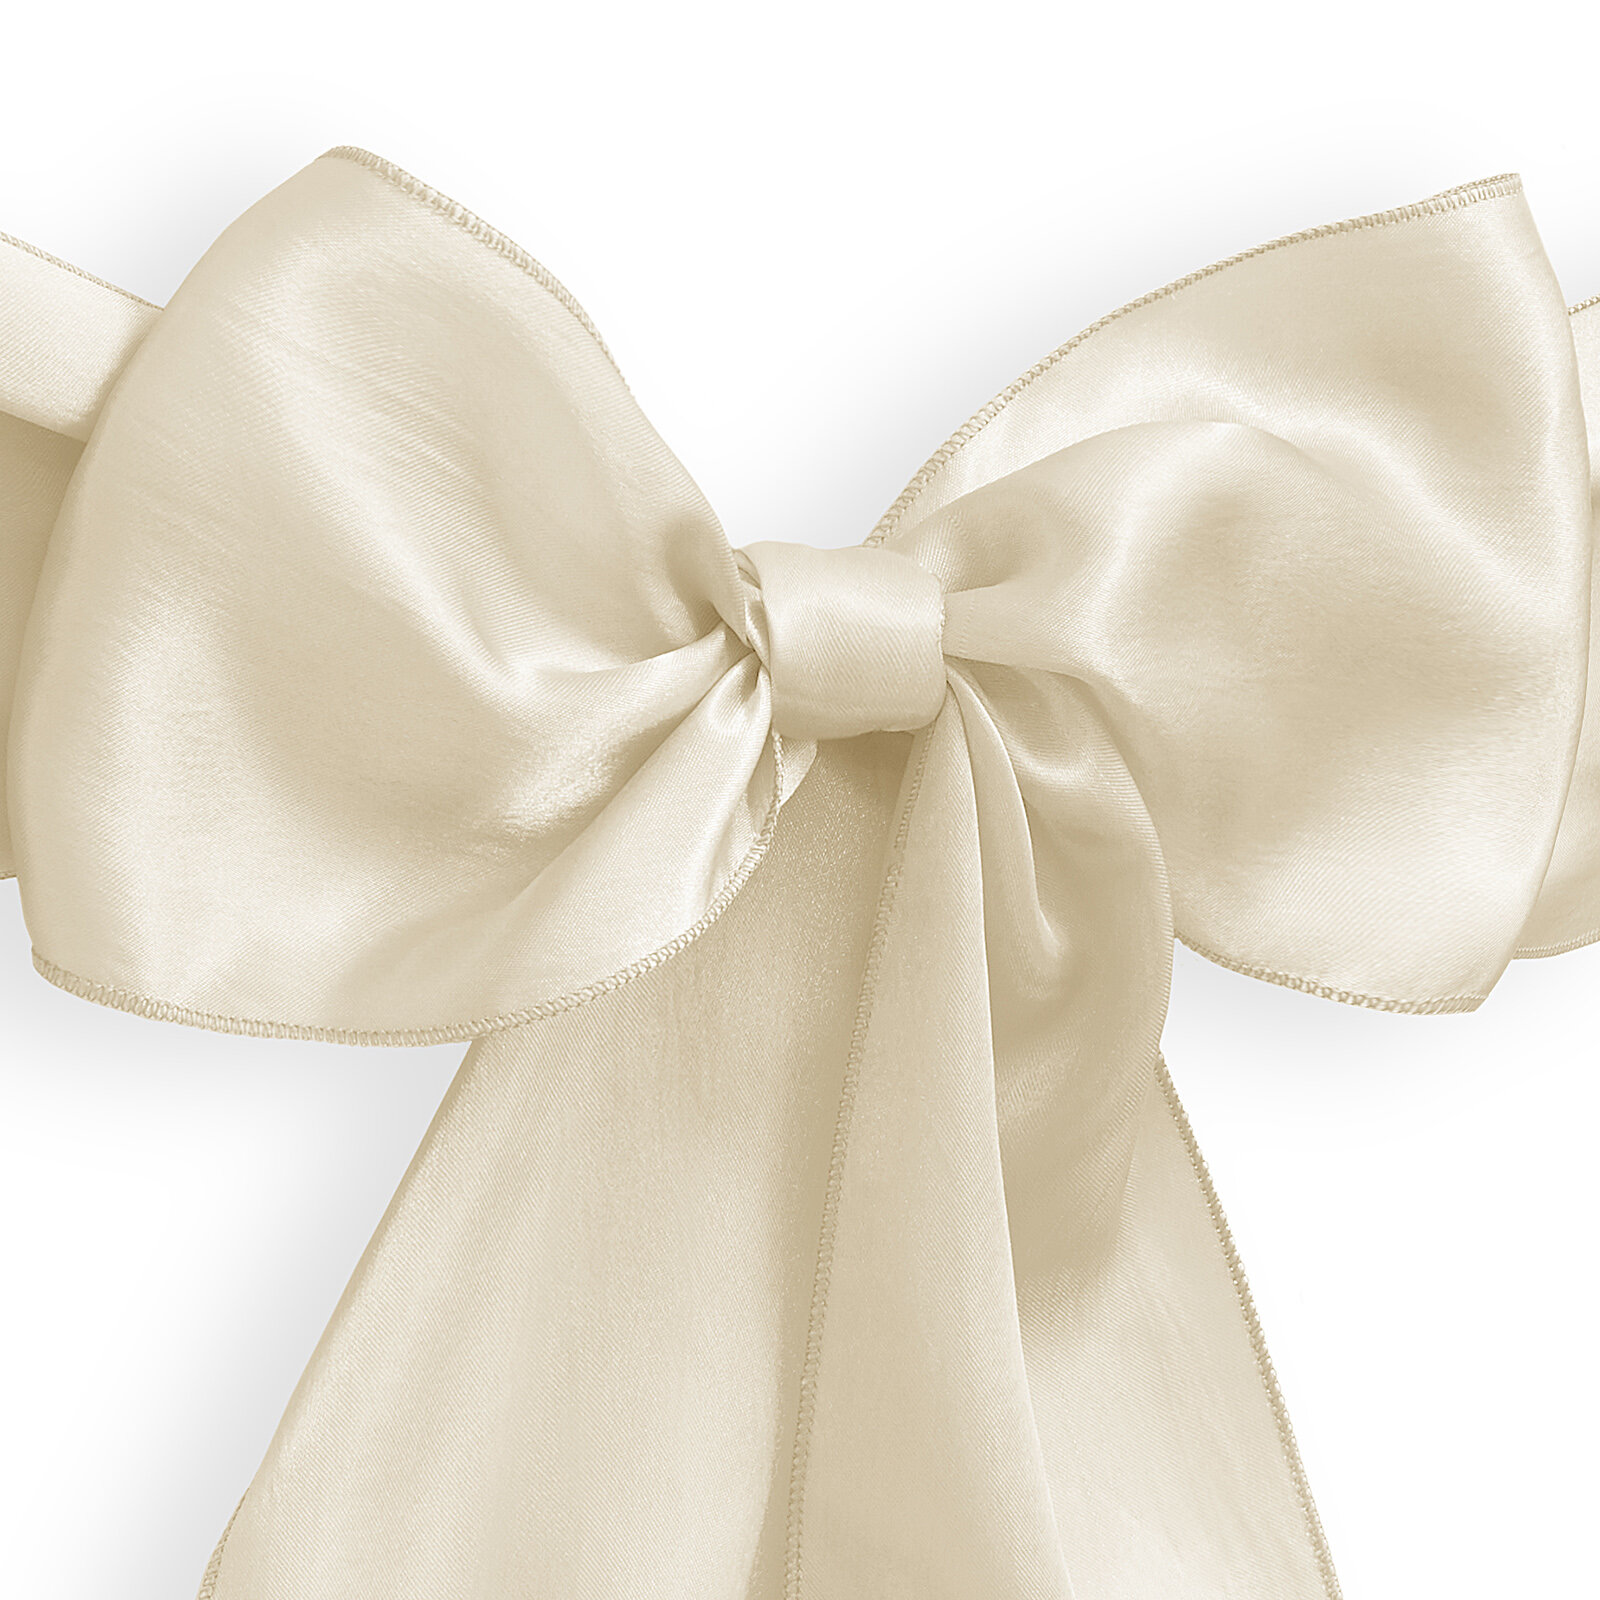 Vertical Border With Champagne Color Ribbon Bow Stock Photo